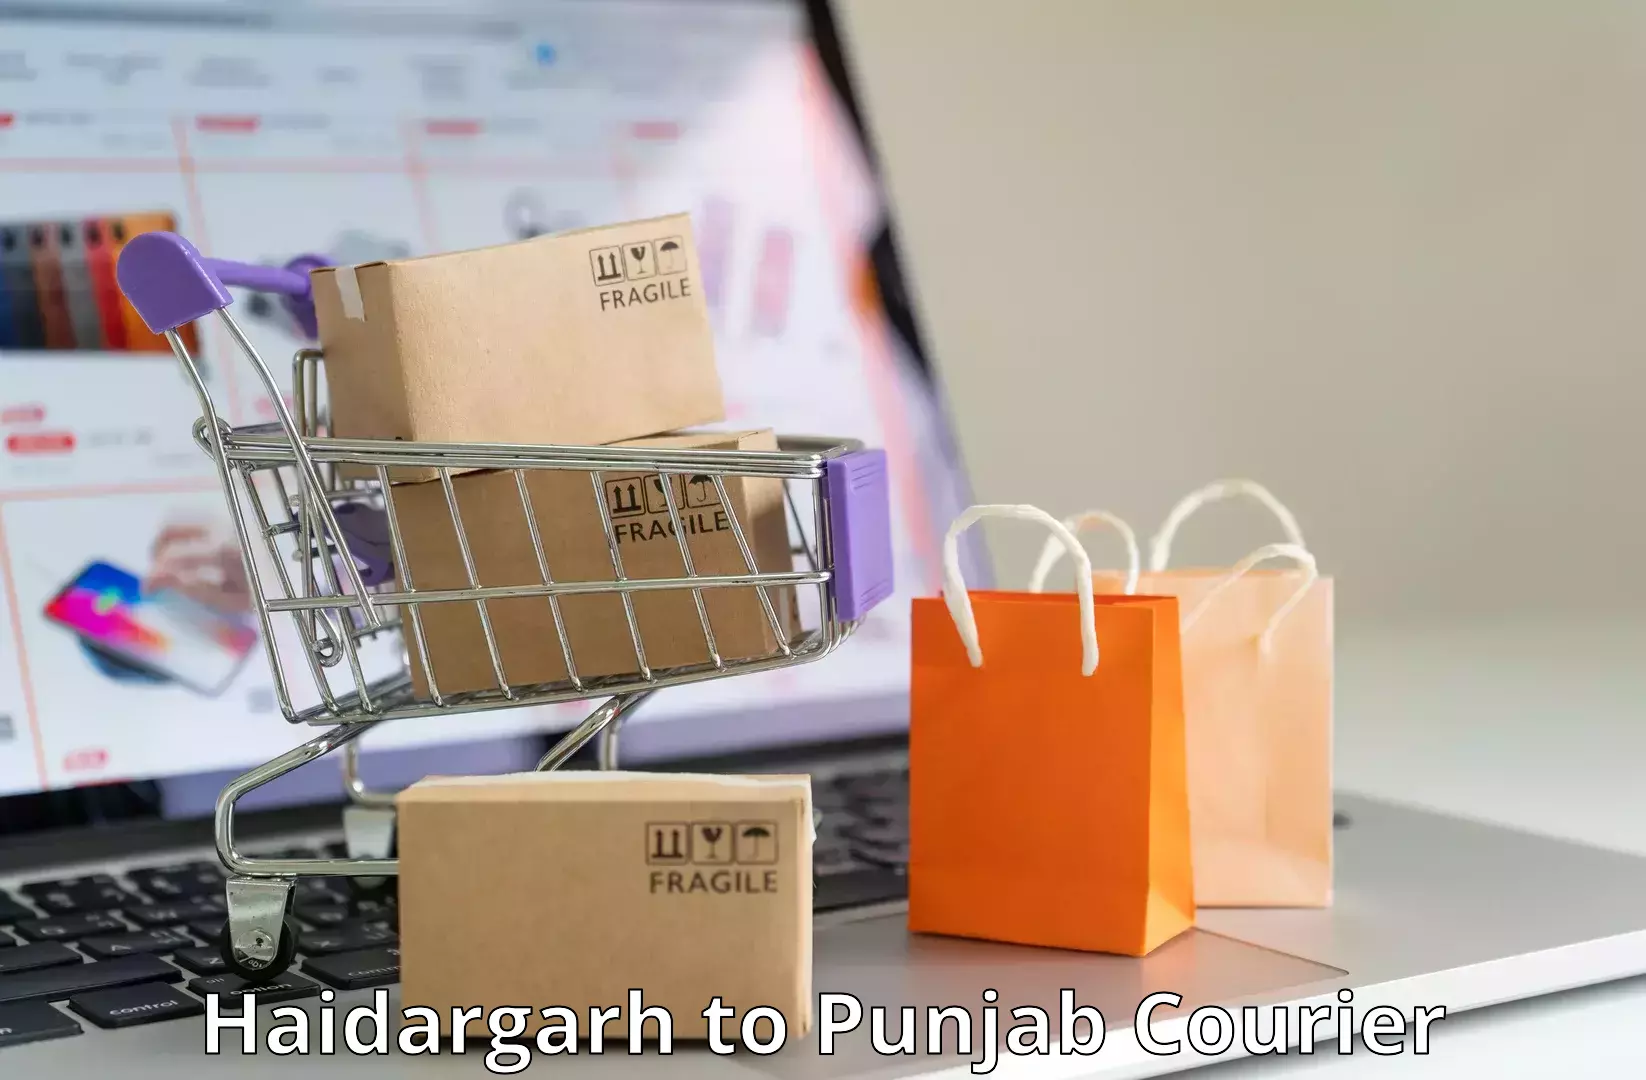 Package delivery network Haidargarh to Mohali